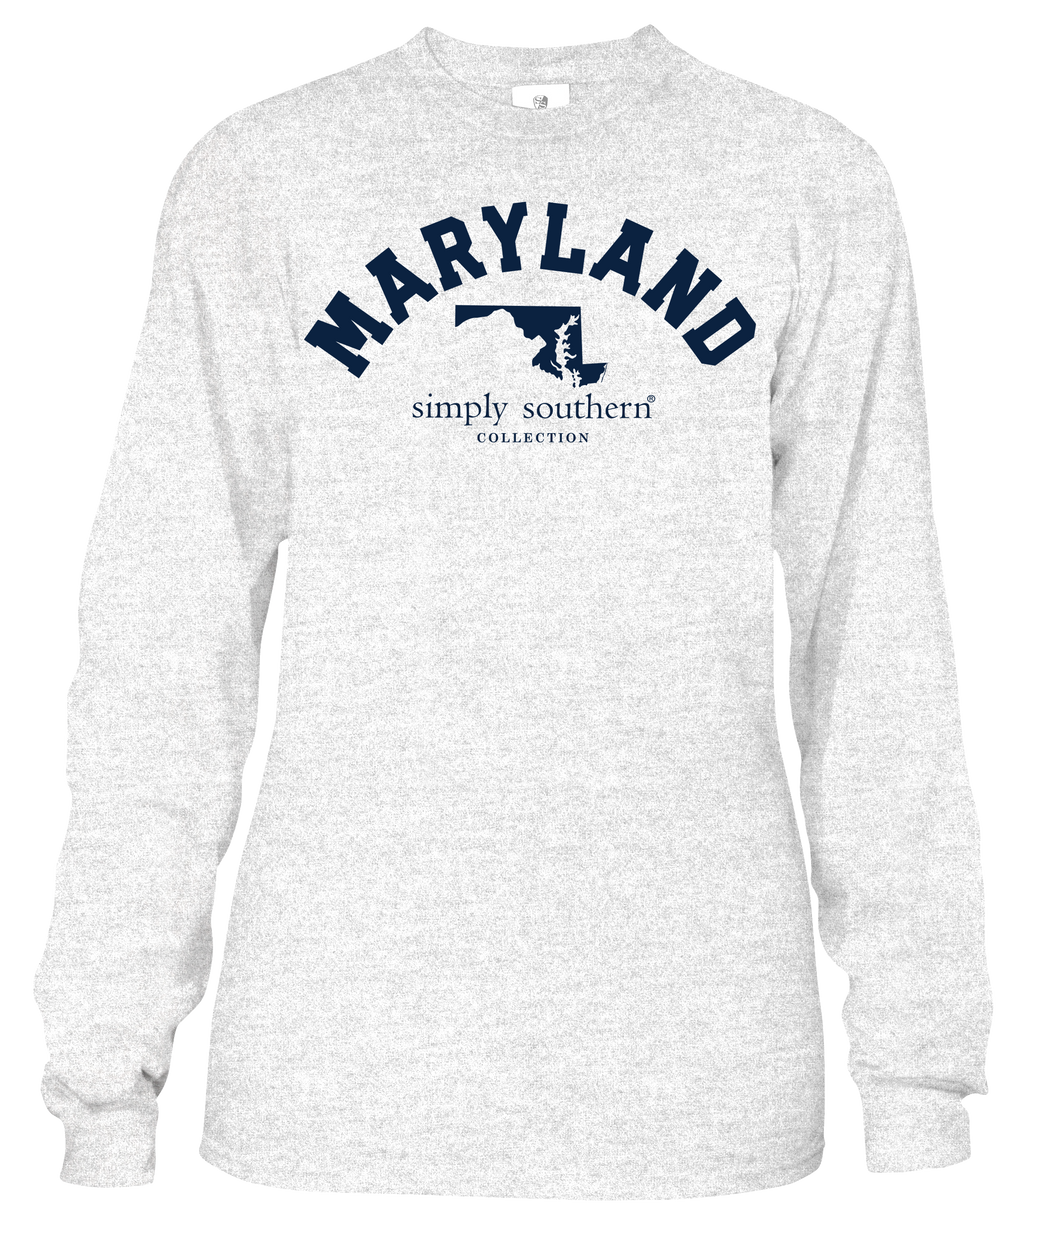 Simply Southern LS Maryland Block Letters TShirt